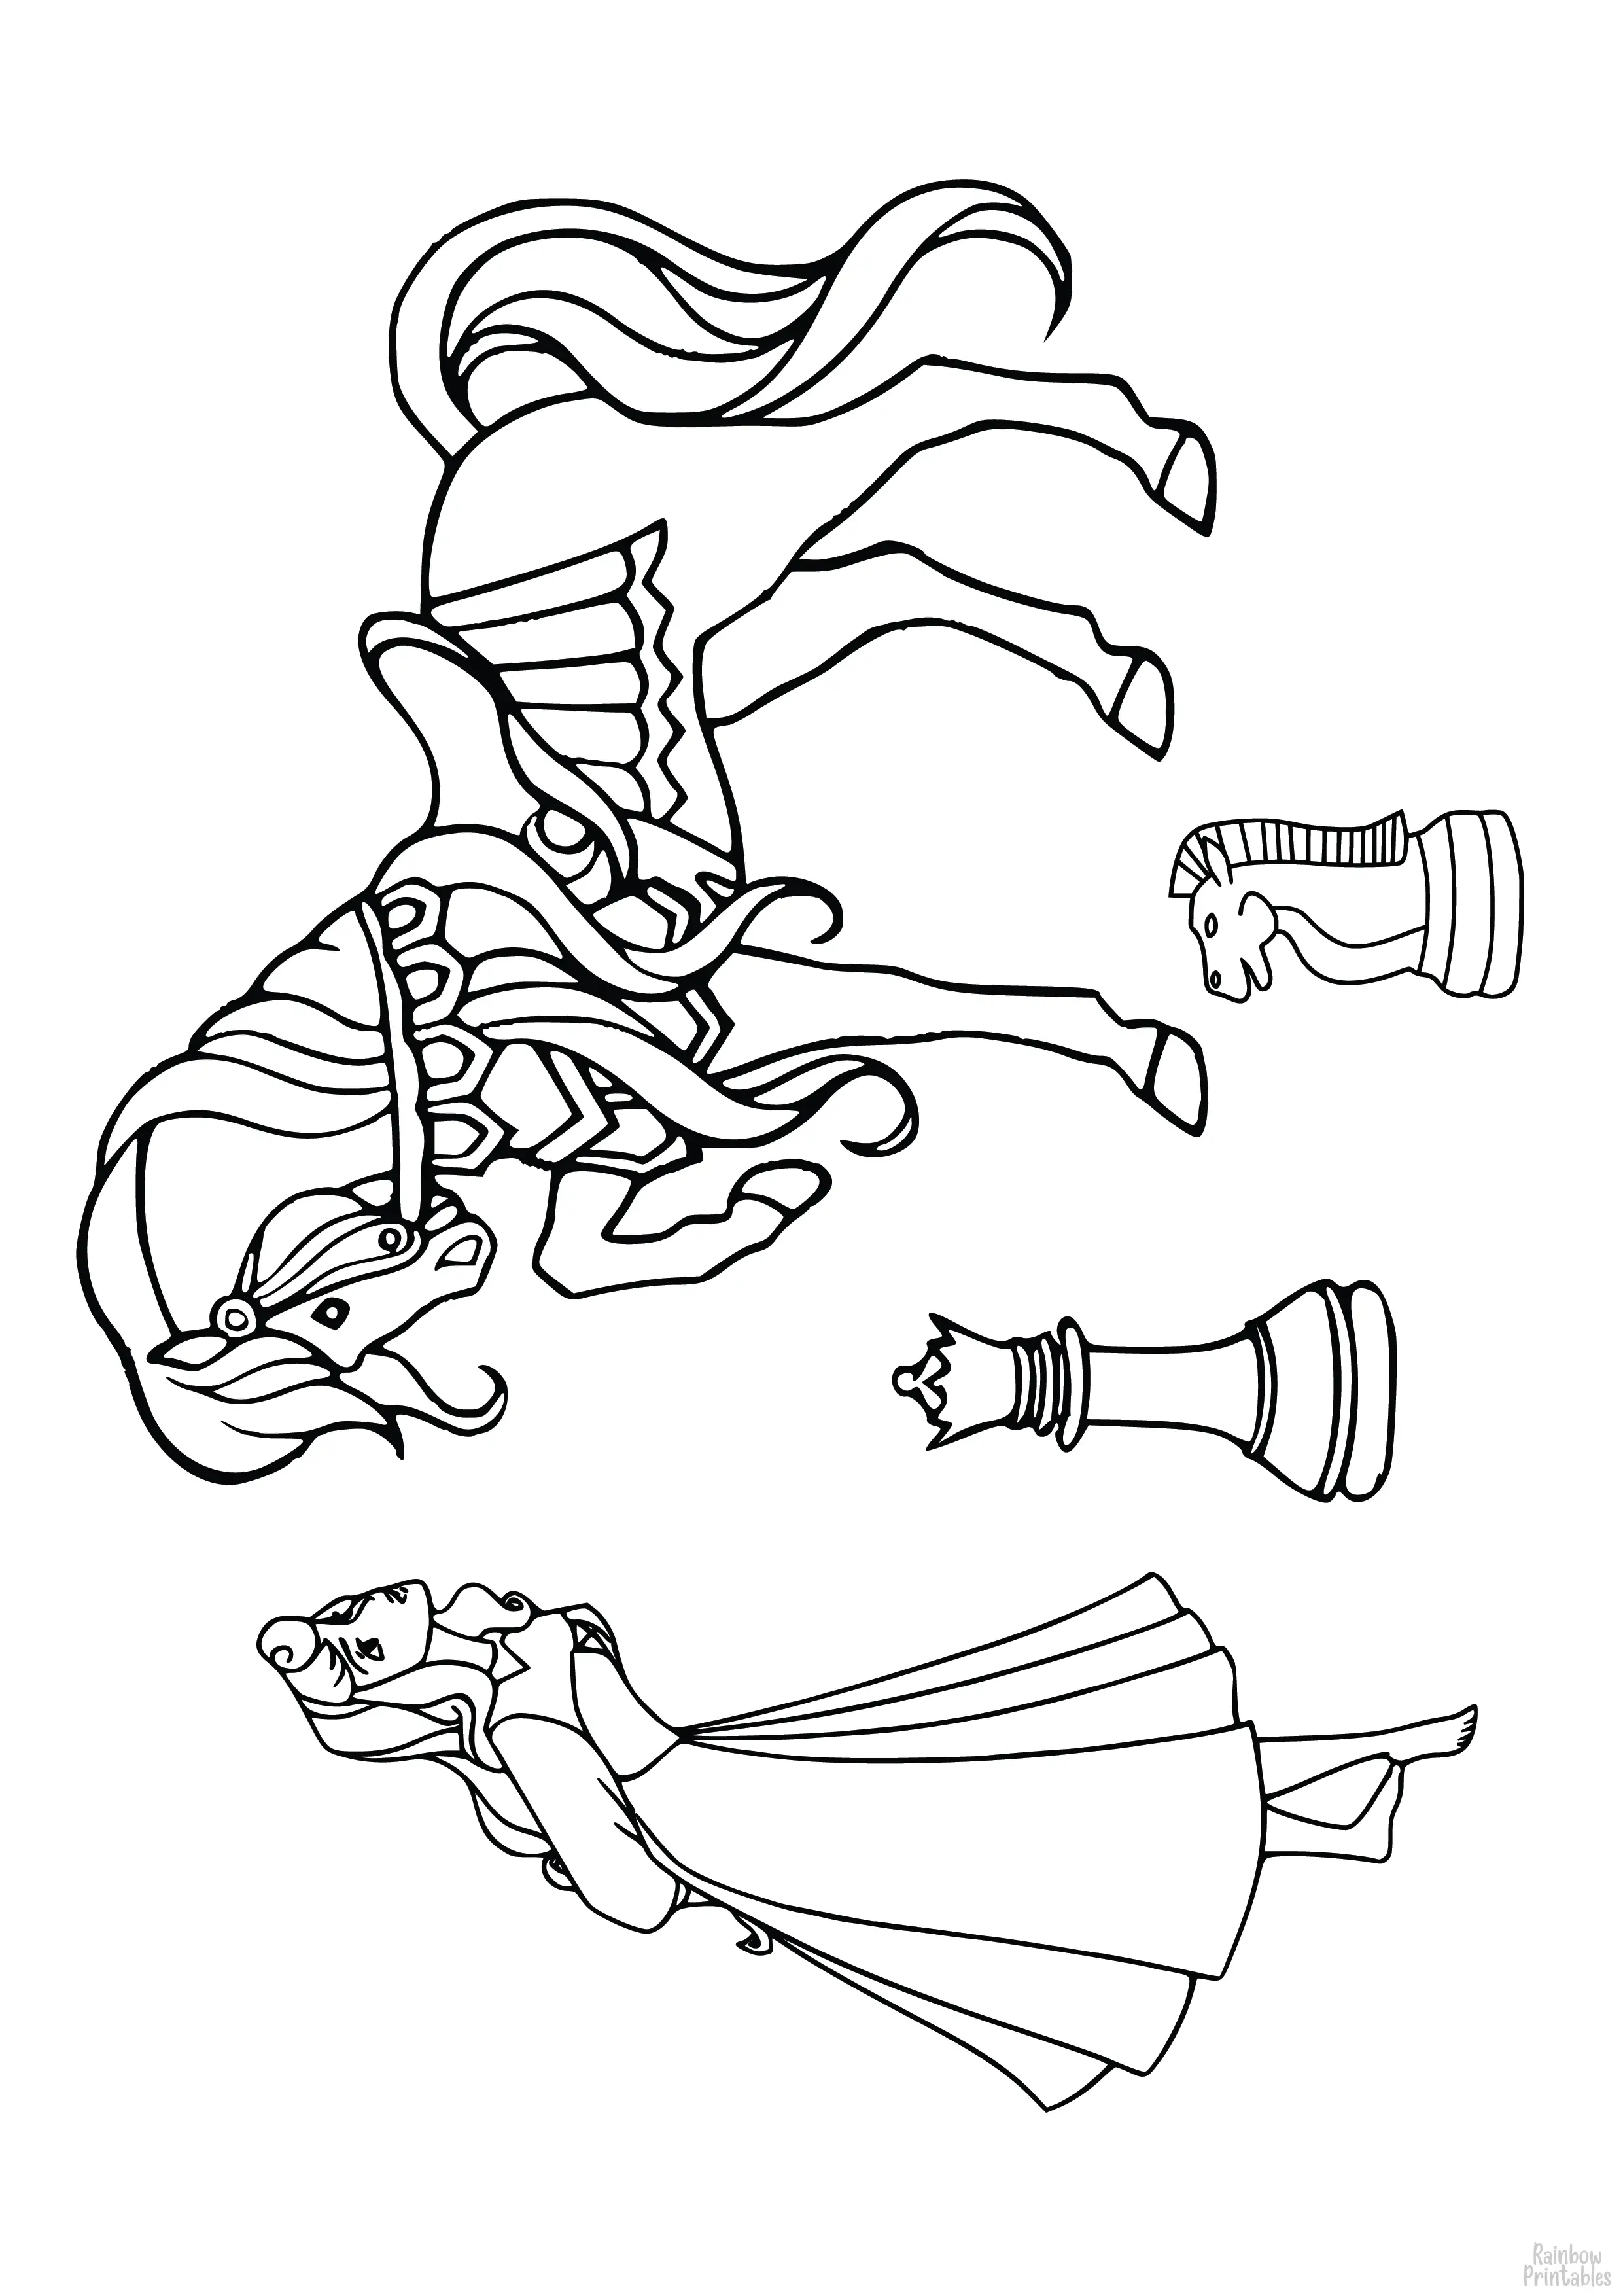 AURORA PRINCESS DISNEY CHESS PIECES Sleeping Beauty Horse Player Free Clipart Coloring Pages for Kids Adults Art Activities Line Art